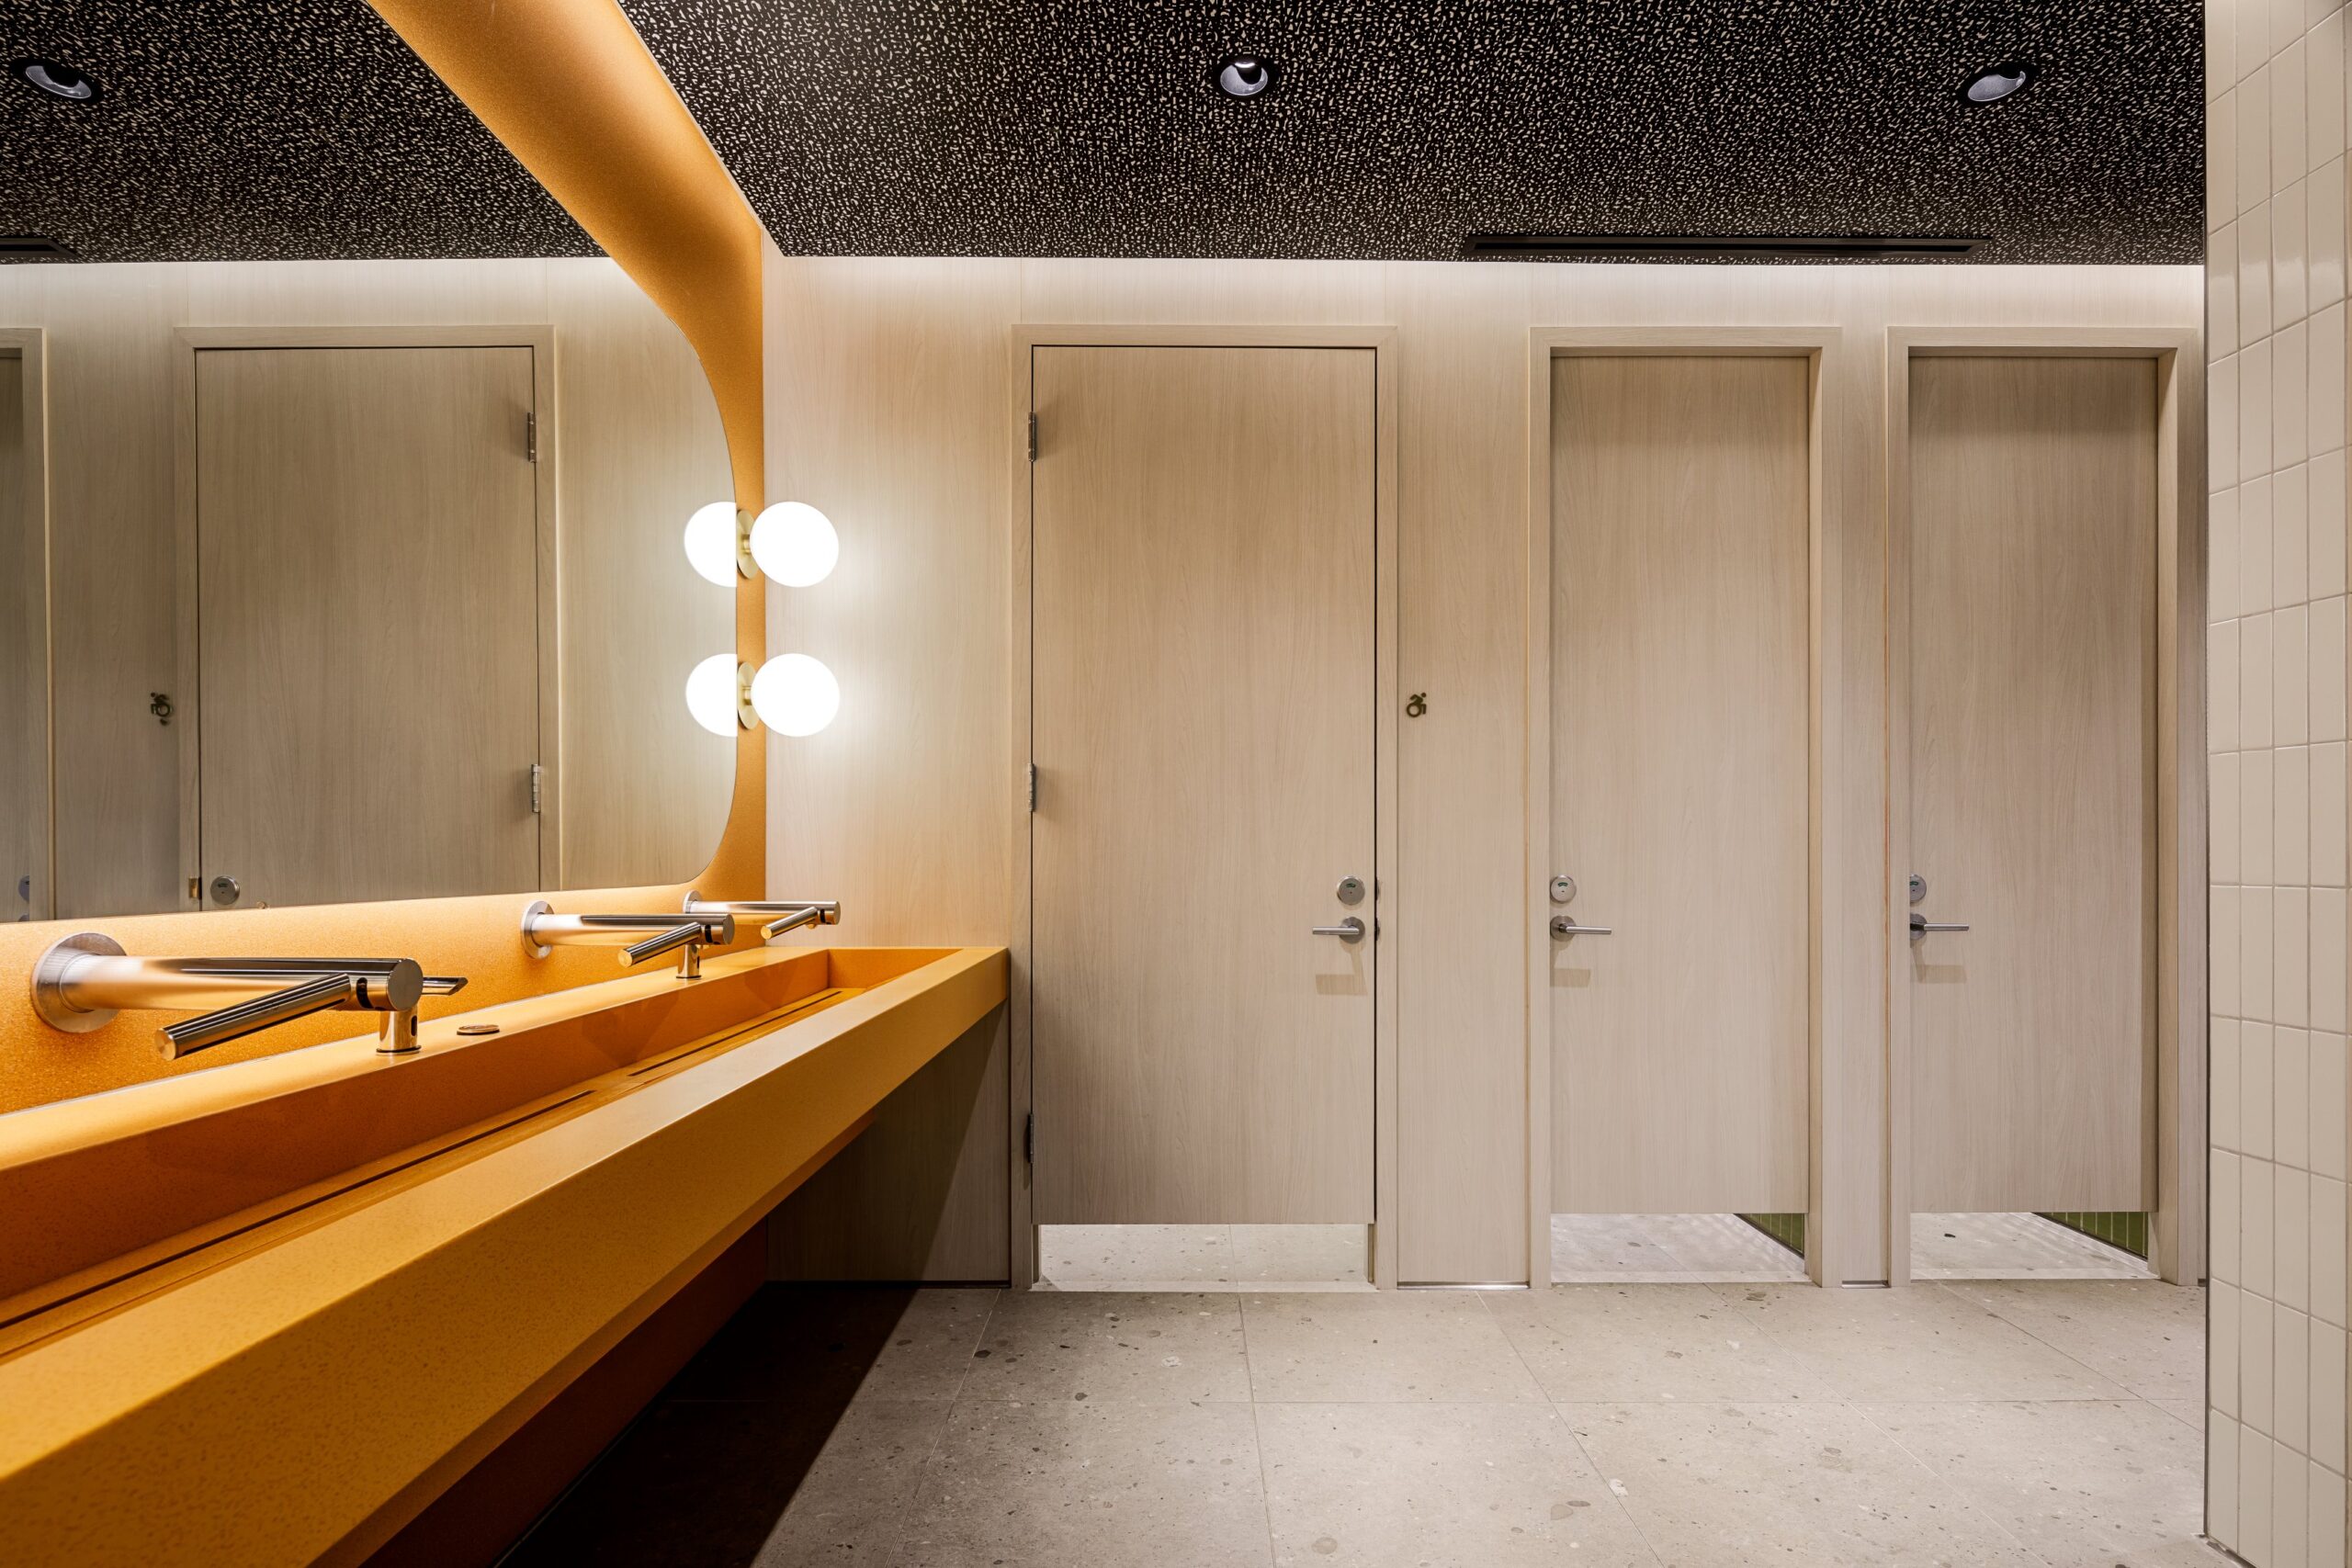 Washroom, mirror, lights, sink, faucets, stalls, , The Cultch in Vancouver BC, by Cutler